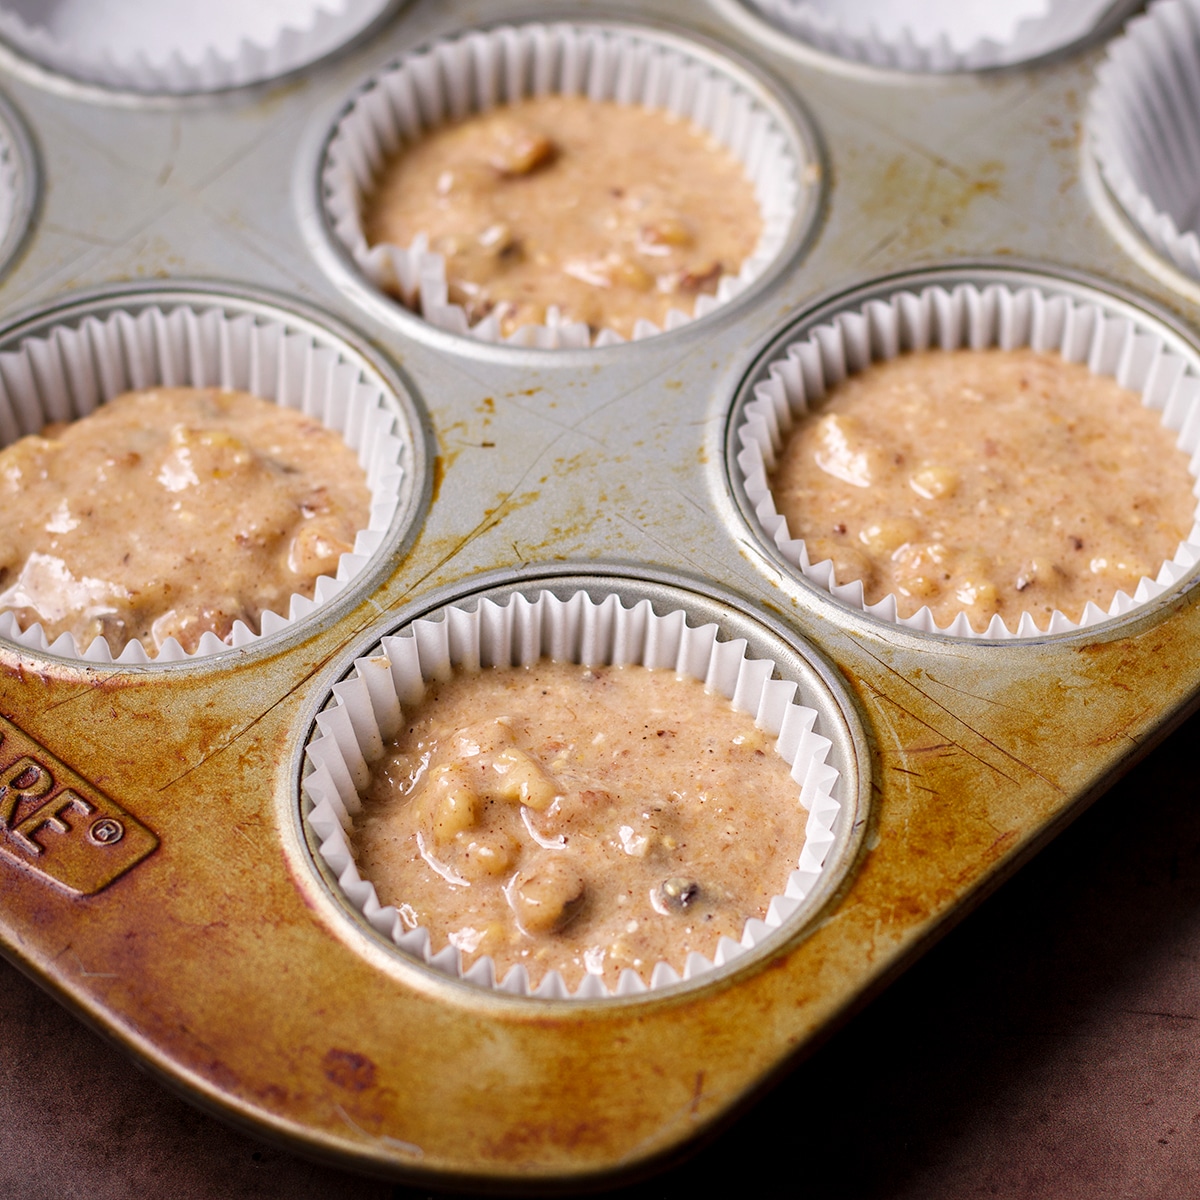 A muffin pan filled with gluten free banana nut muffin batter.